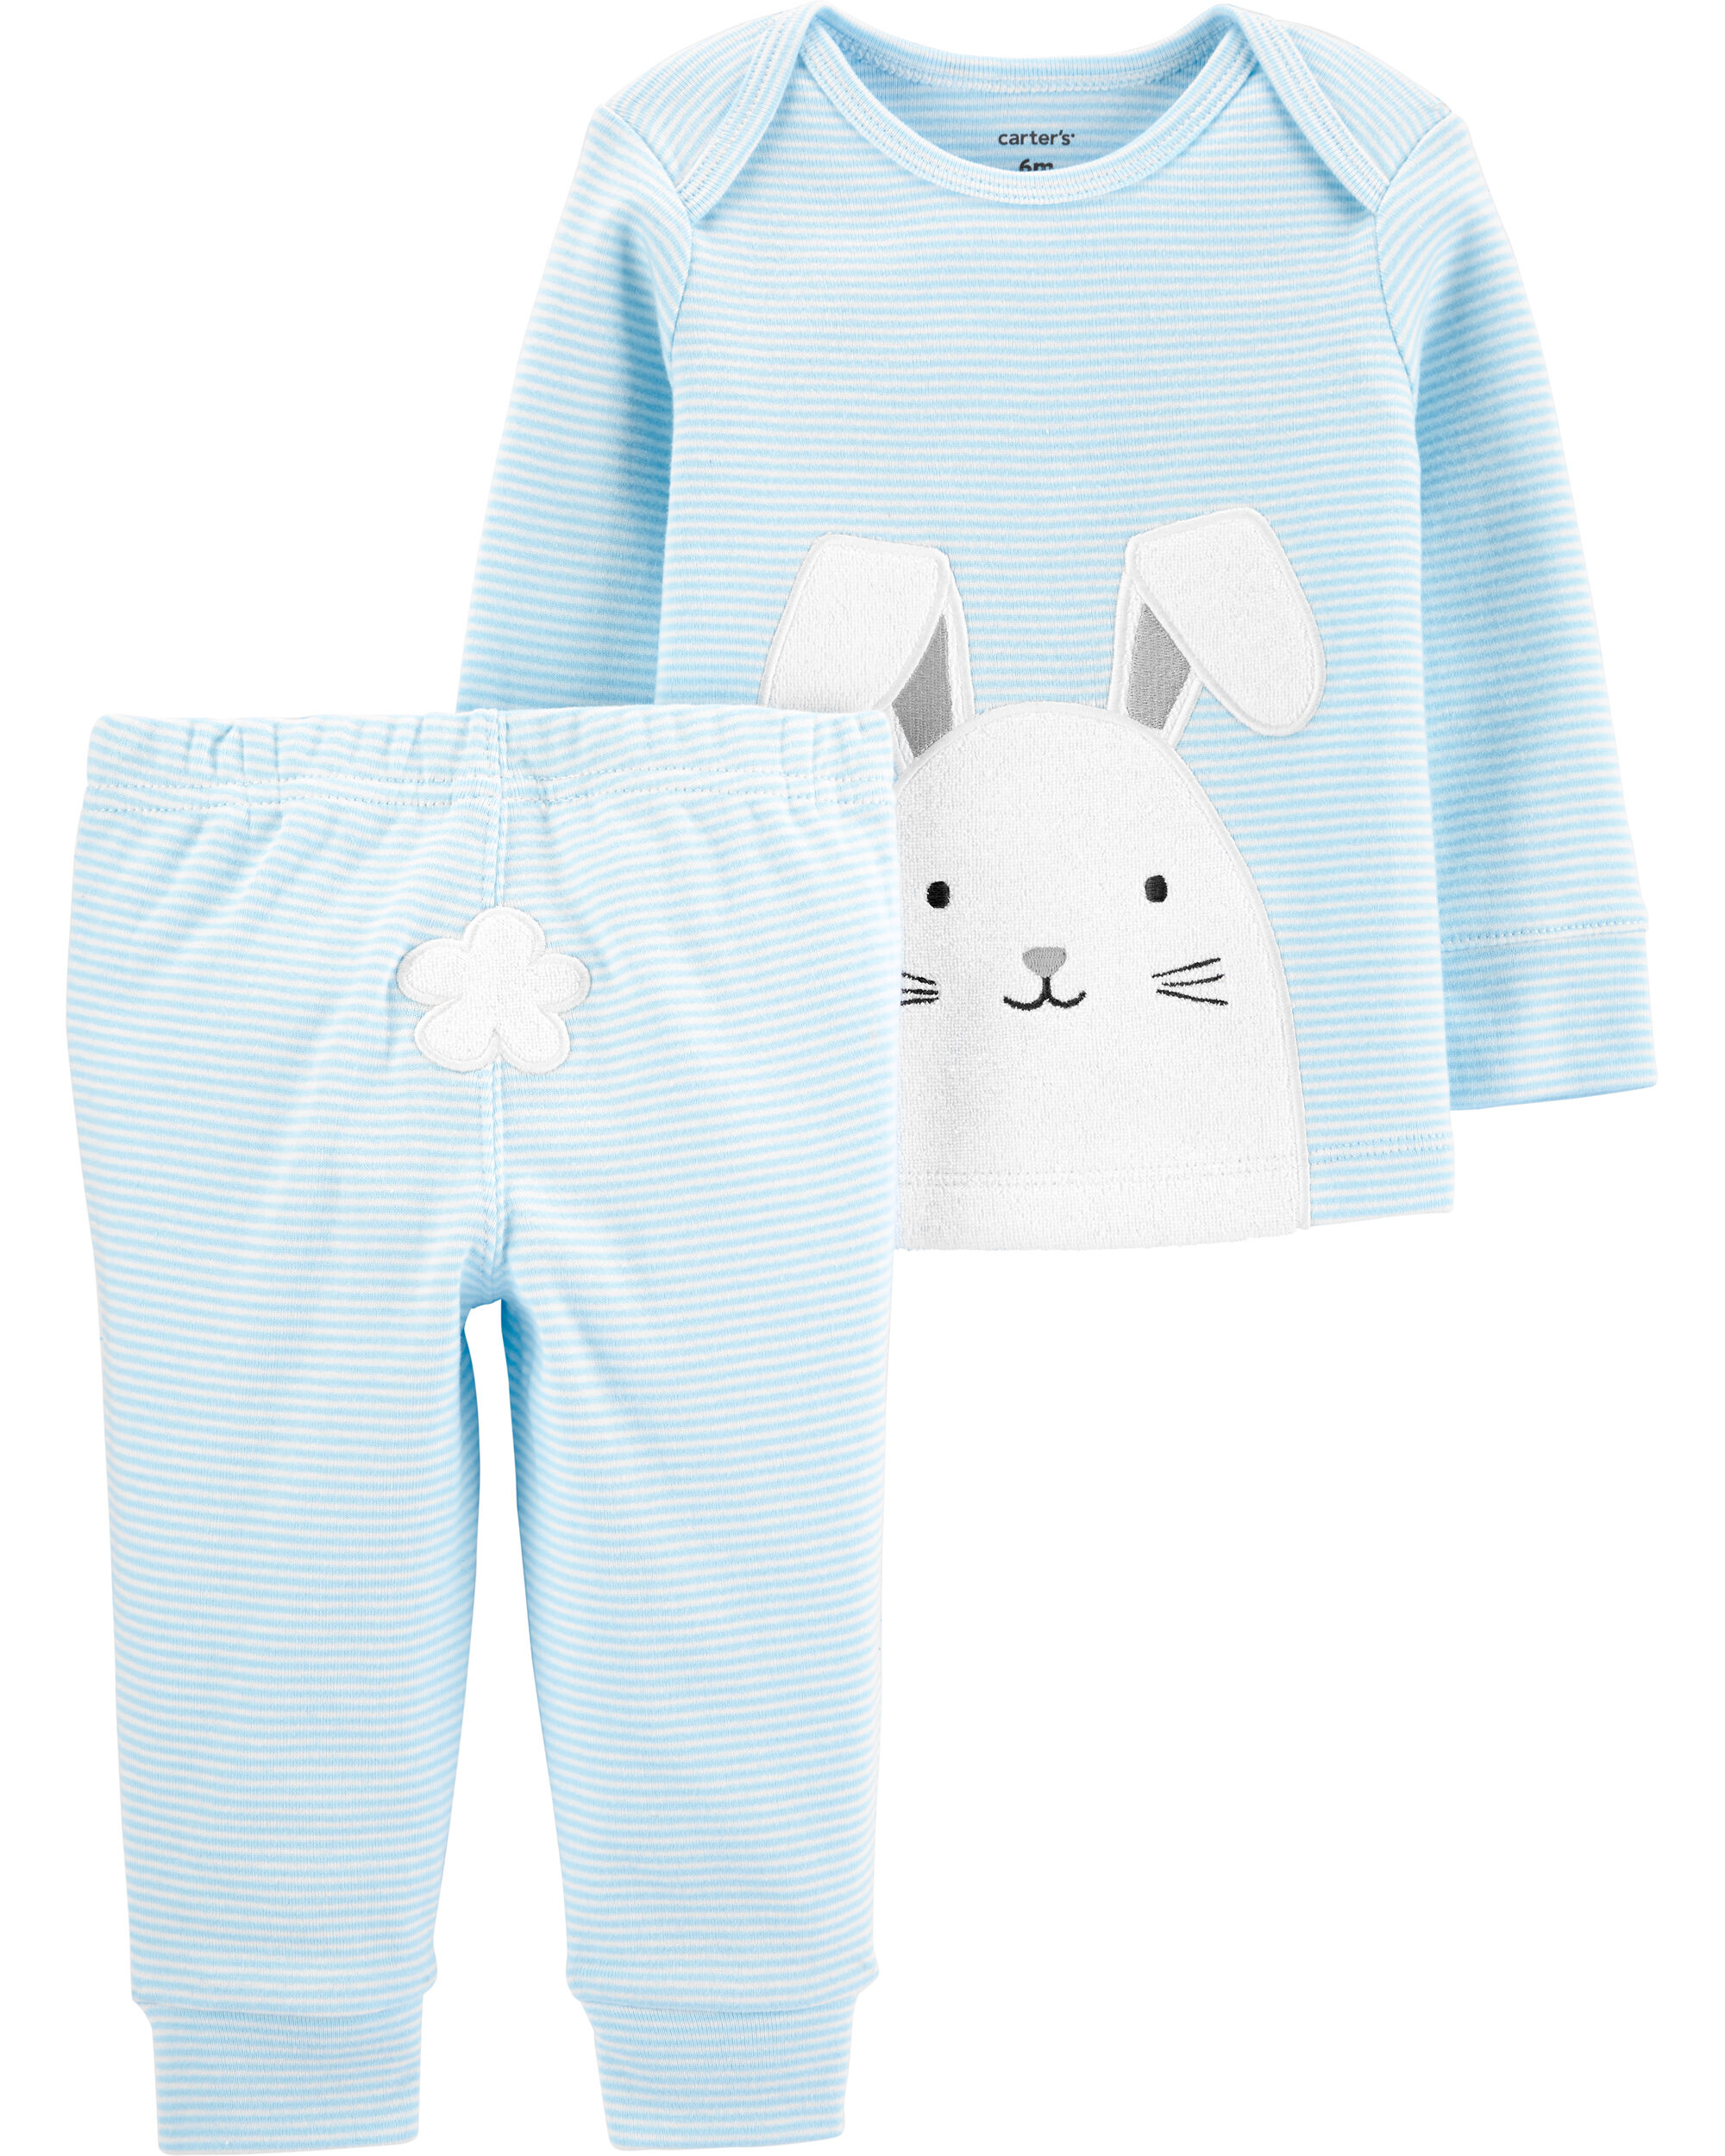 carters bunny outfit